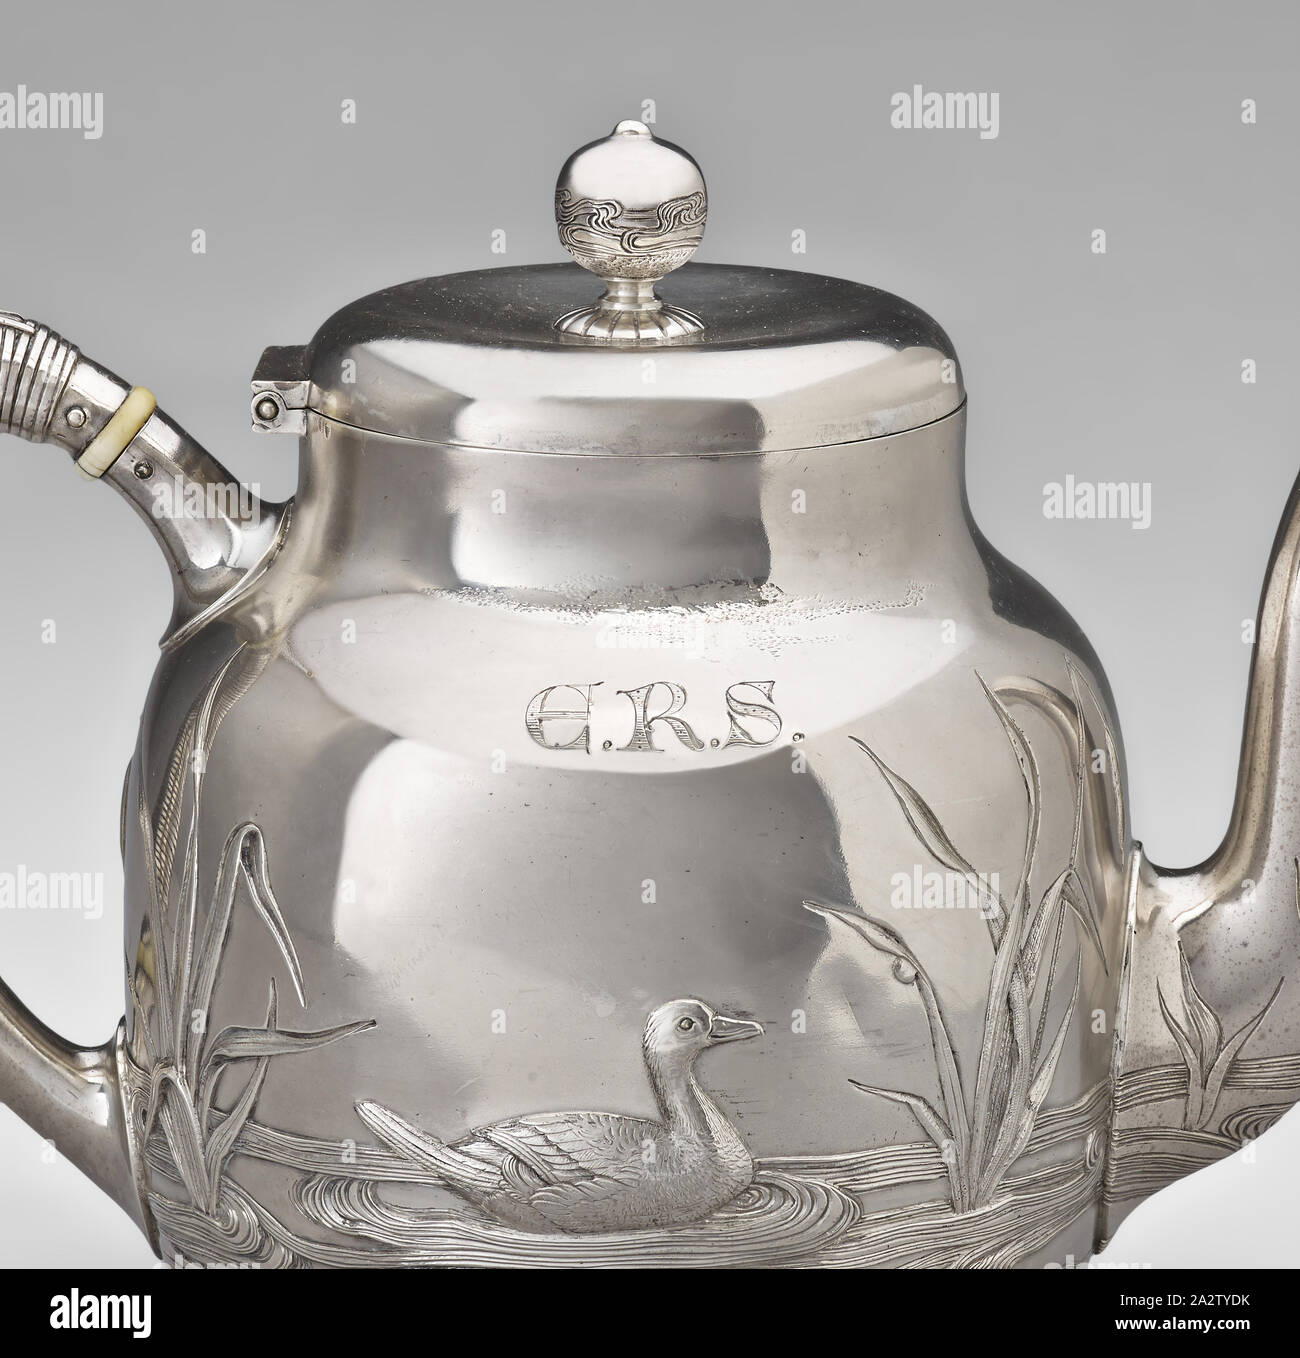 https://c8.alamy.com/comp/2A2TYDK/teapot-dominick-haff-manufacturer-american-giles-brothers-and-company-retailer-american-1881-silver-ivory-6-38-x-9-x-5-in-inscribed-side-ers-stamped-underside-116-stamped-underside-sterling-stamped-underside-giles-bros-co-stamped-underside-925-in-a-rectangle-outline-of-a-circle-1-8-8-1-in-a-square-turned-on-a-45-degree-angle-decorative-arts-2A2TYDK.jpg